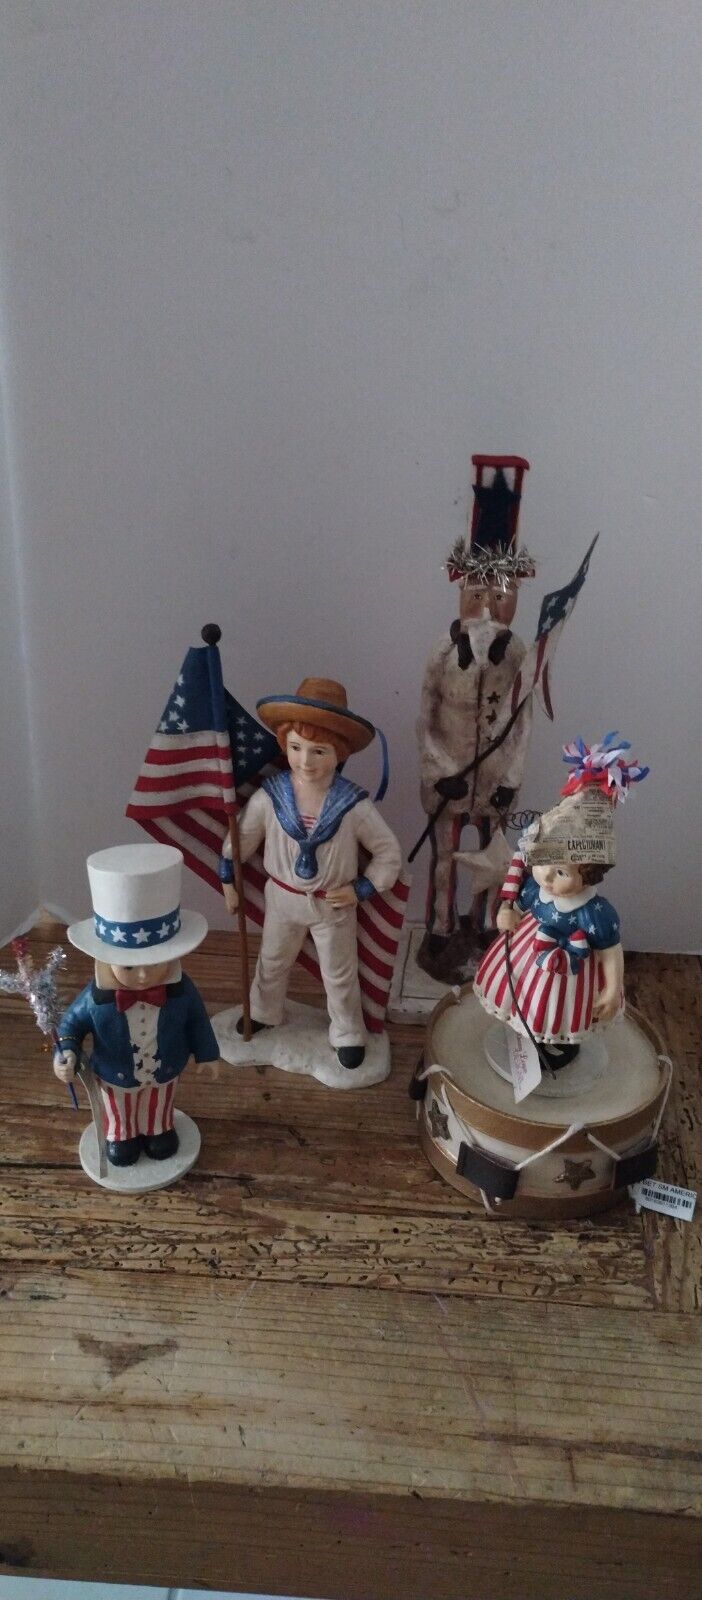 Bethany Lowe/ESC Trading comp/4th of July figures/Patriotic/ uncle sam/children